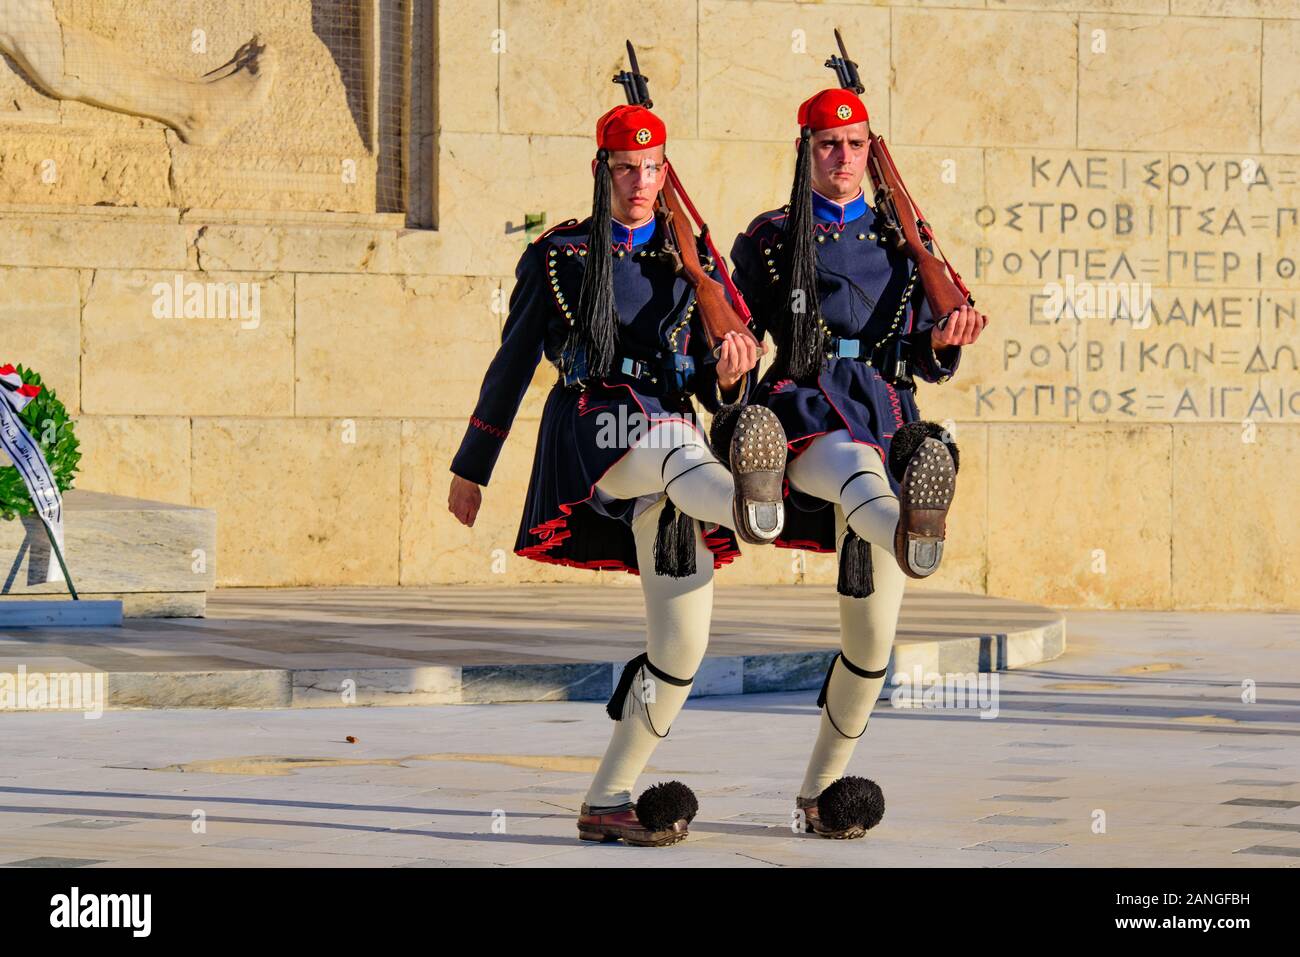 Changing the Guard ceremony at Syntagma Square in Athens, Greece Stock Photo